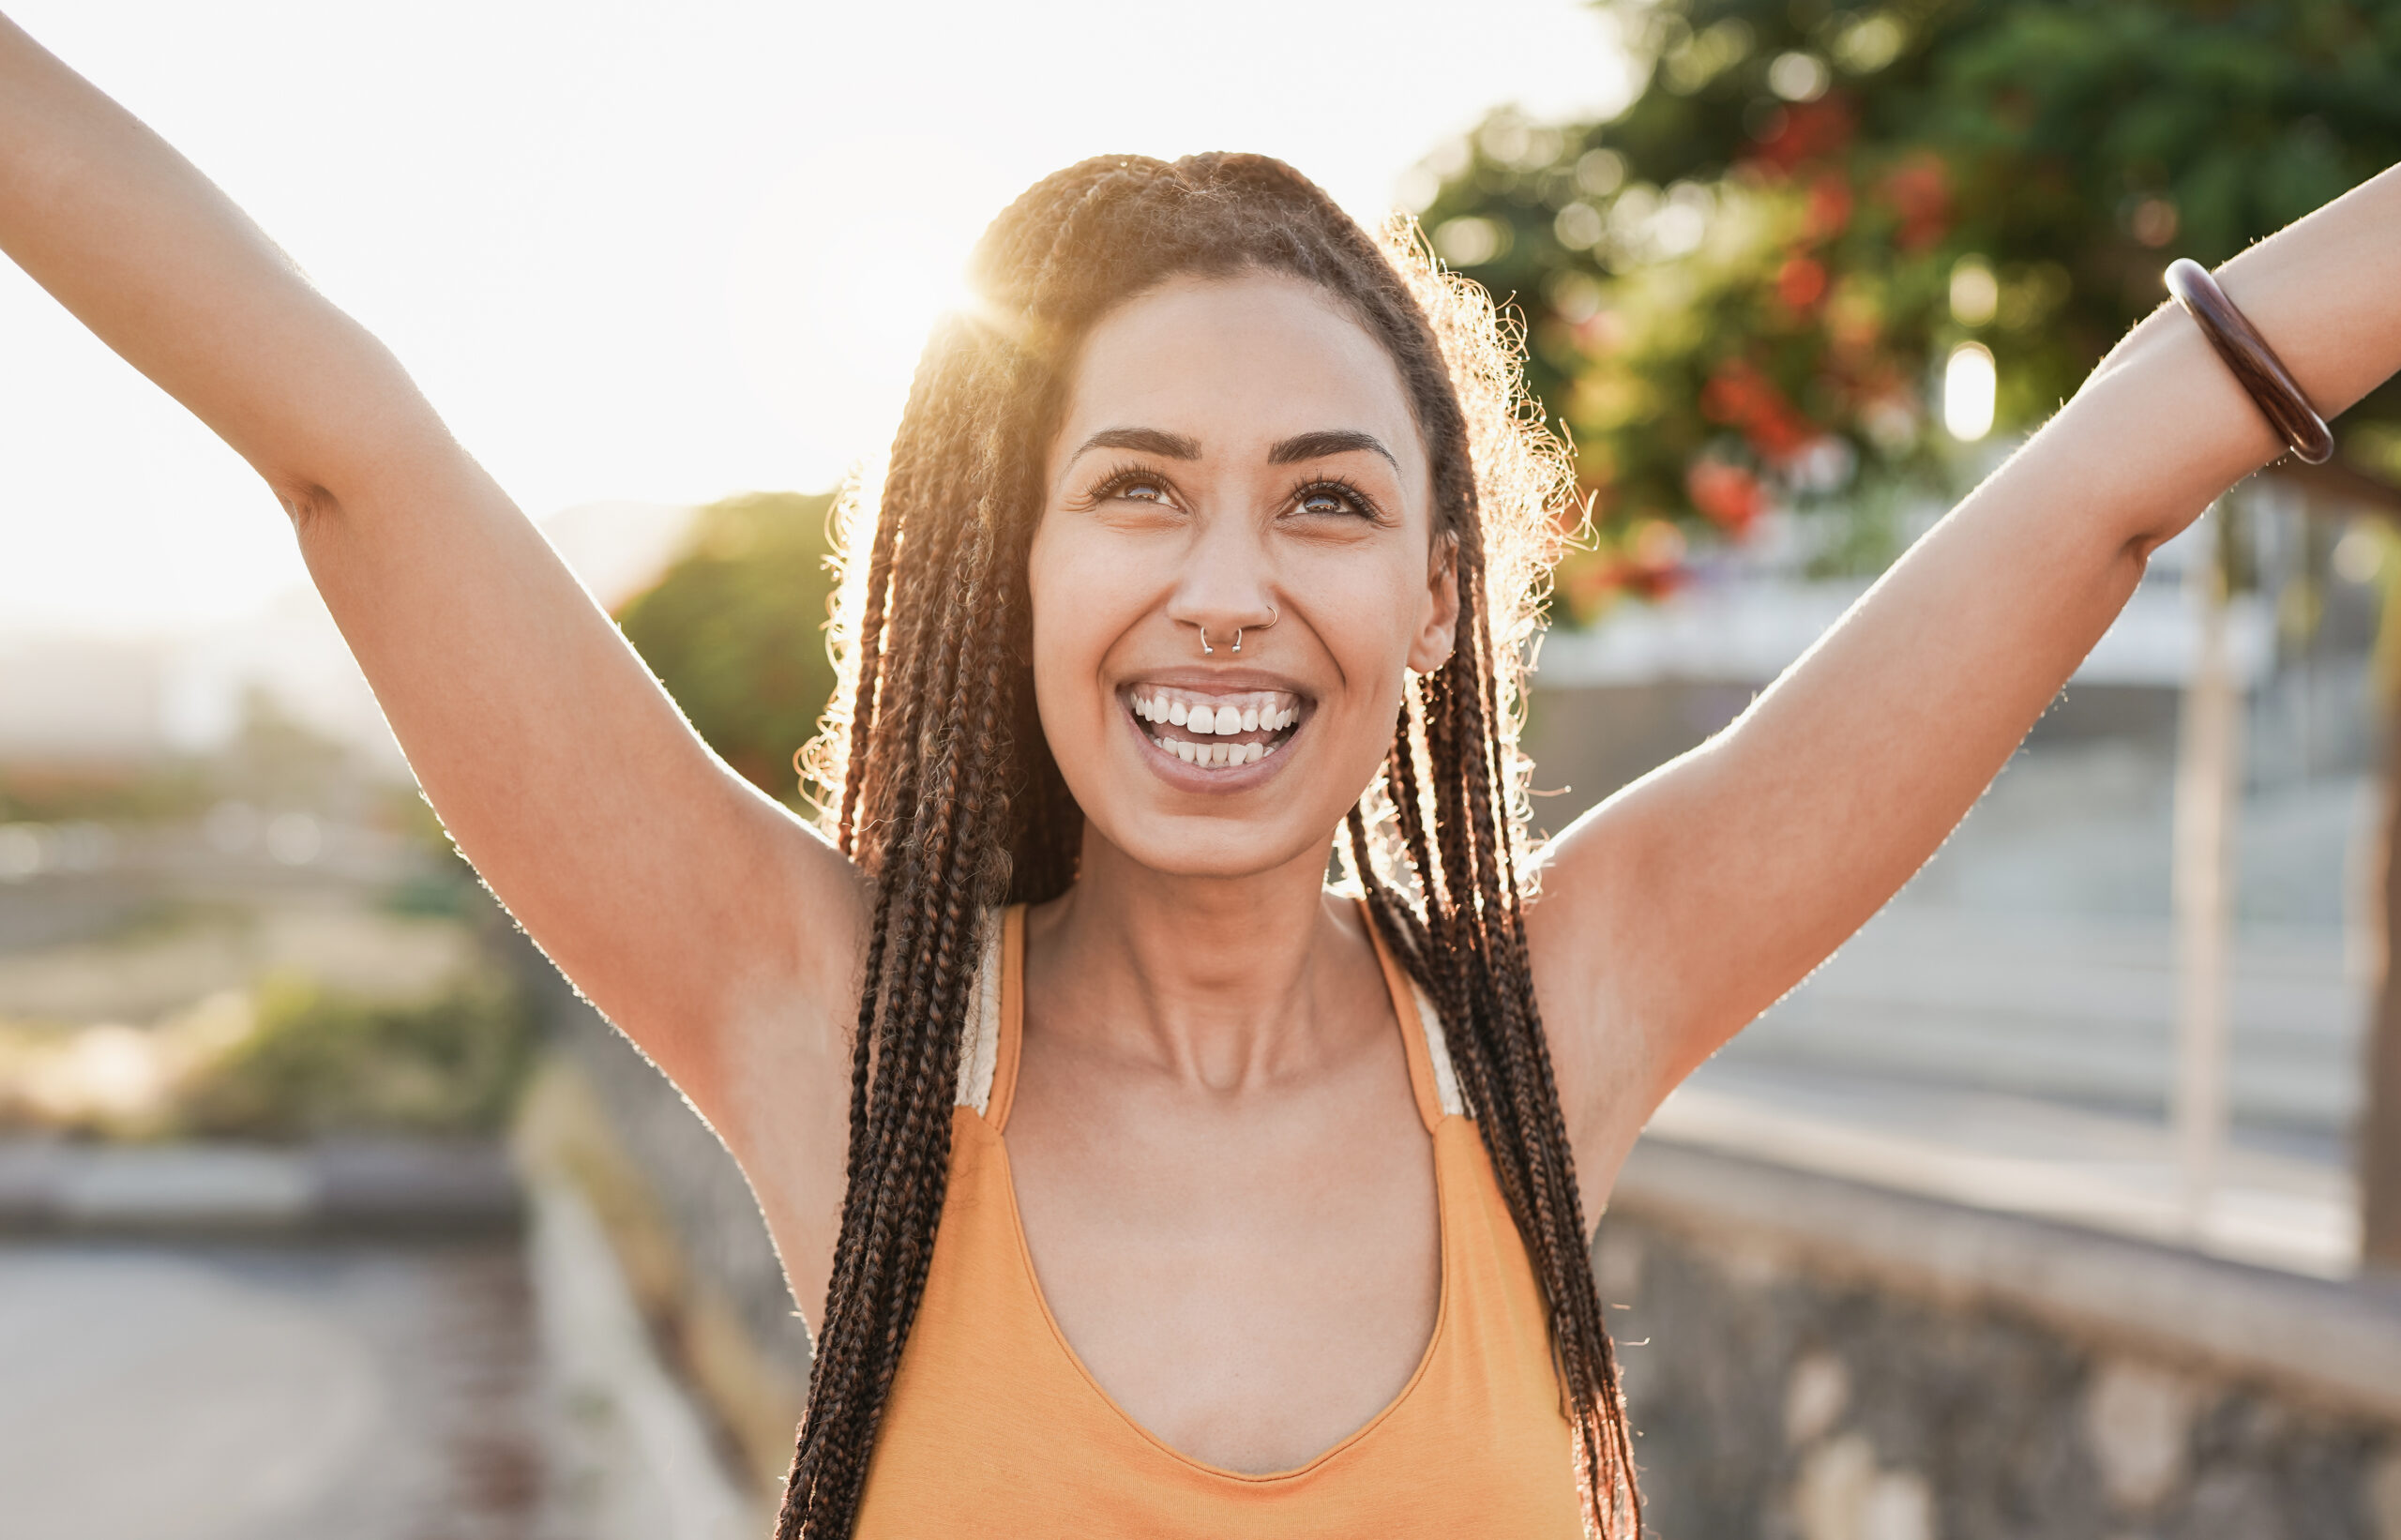 Woman with hands raised in celebration against a sunset, symbolizing joy and freedom after quitting drinking.